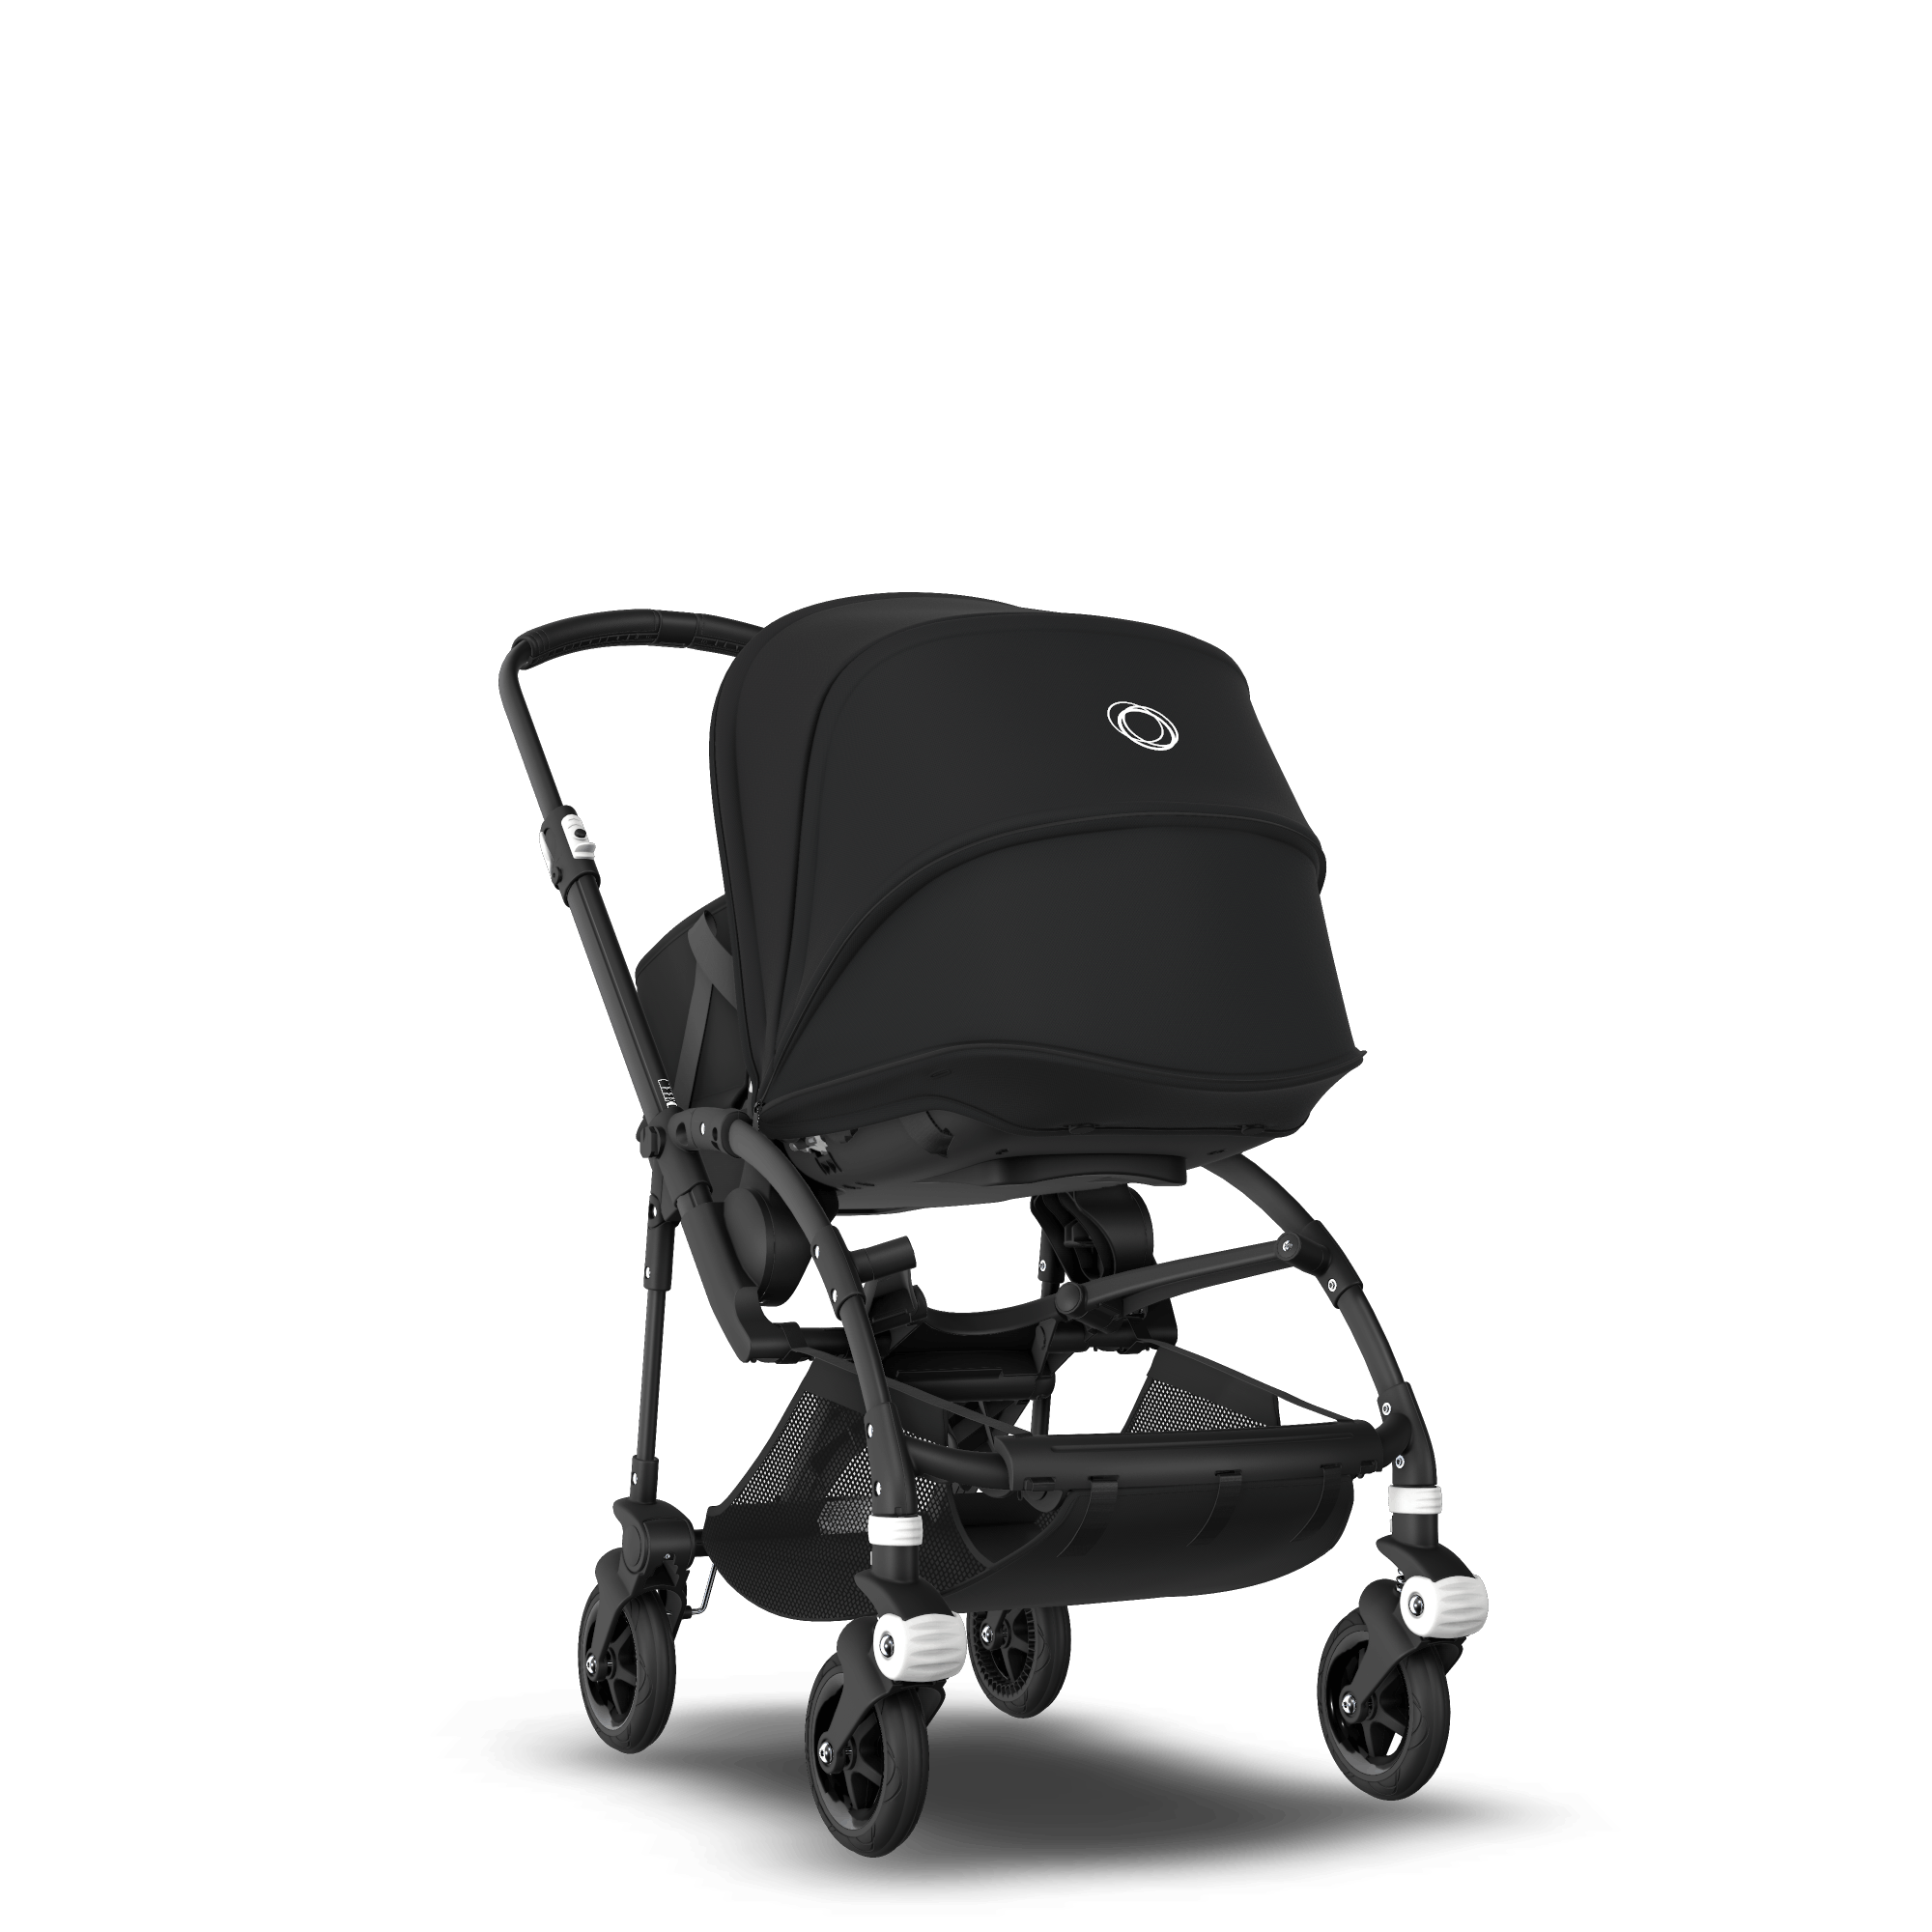 bugaboo bassinet to seat